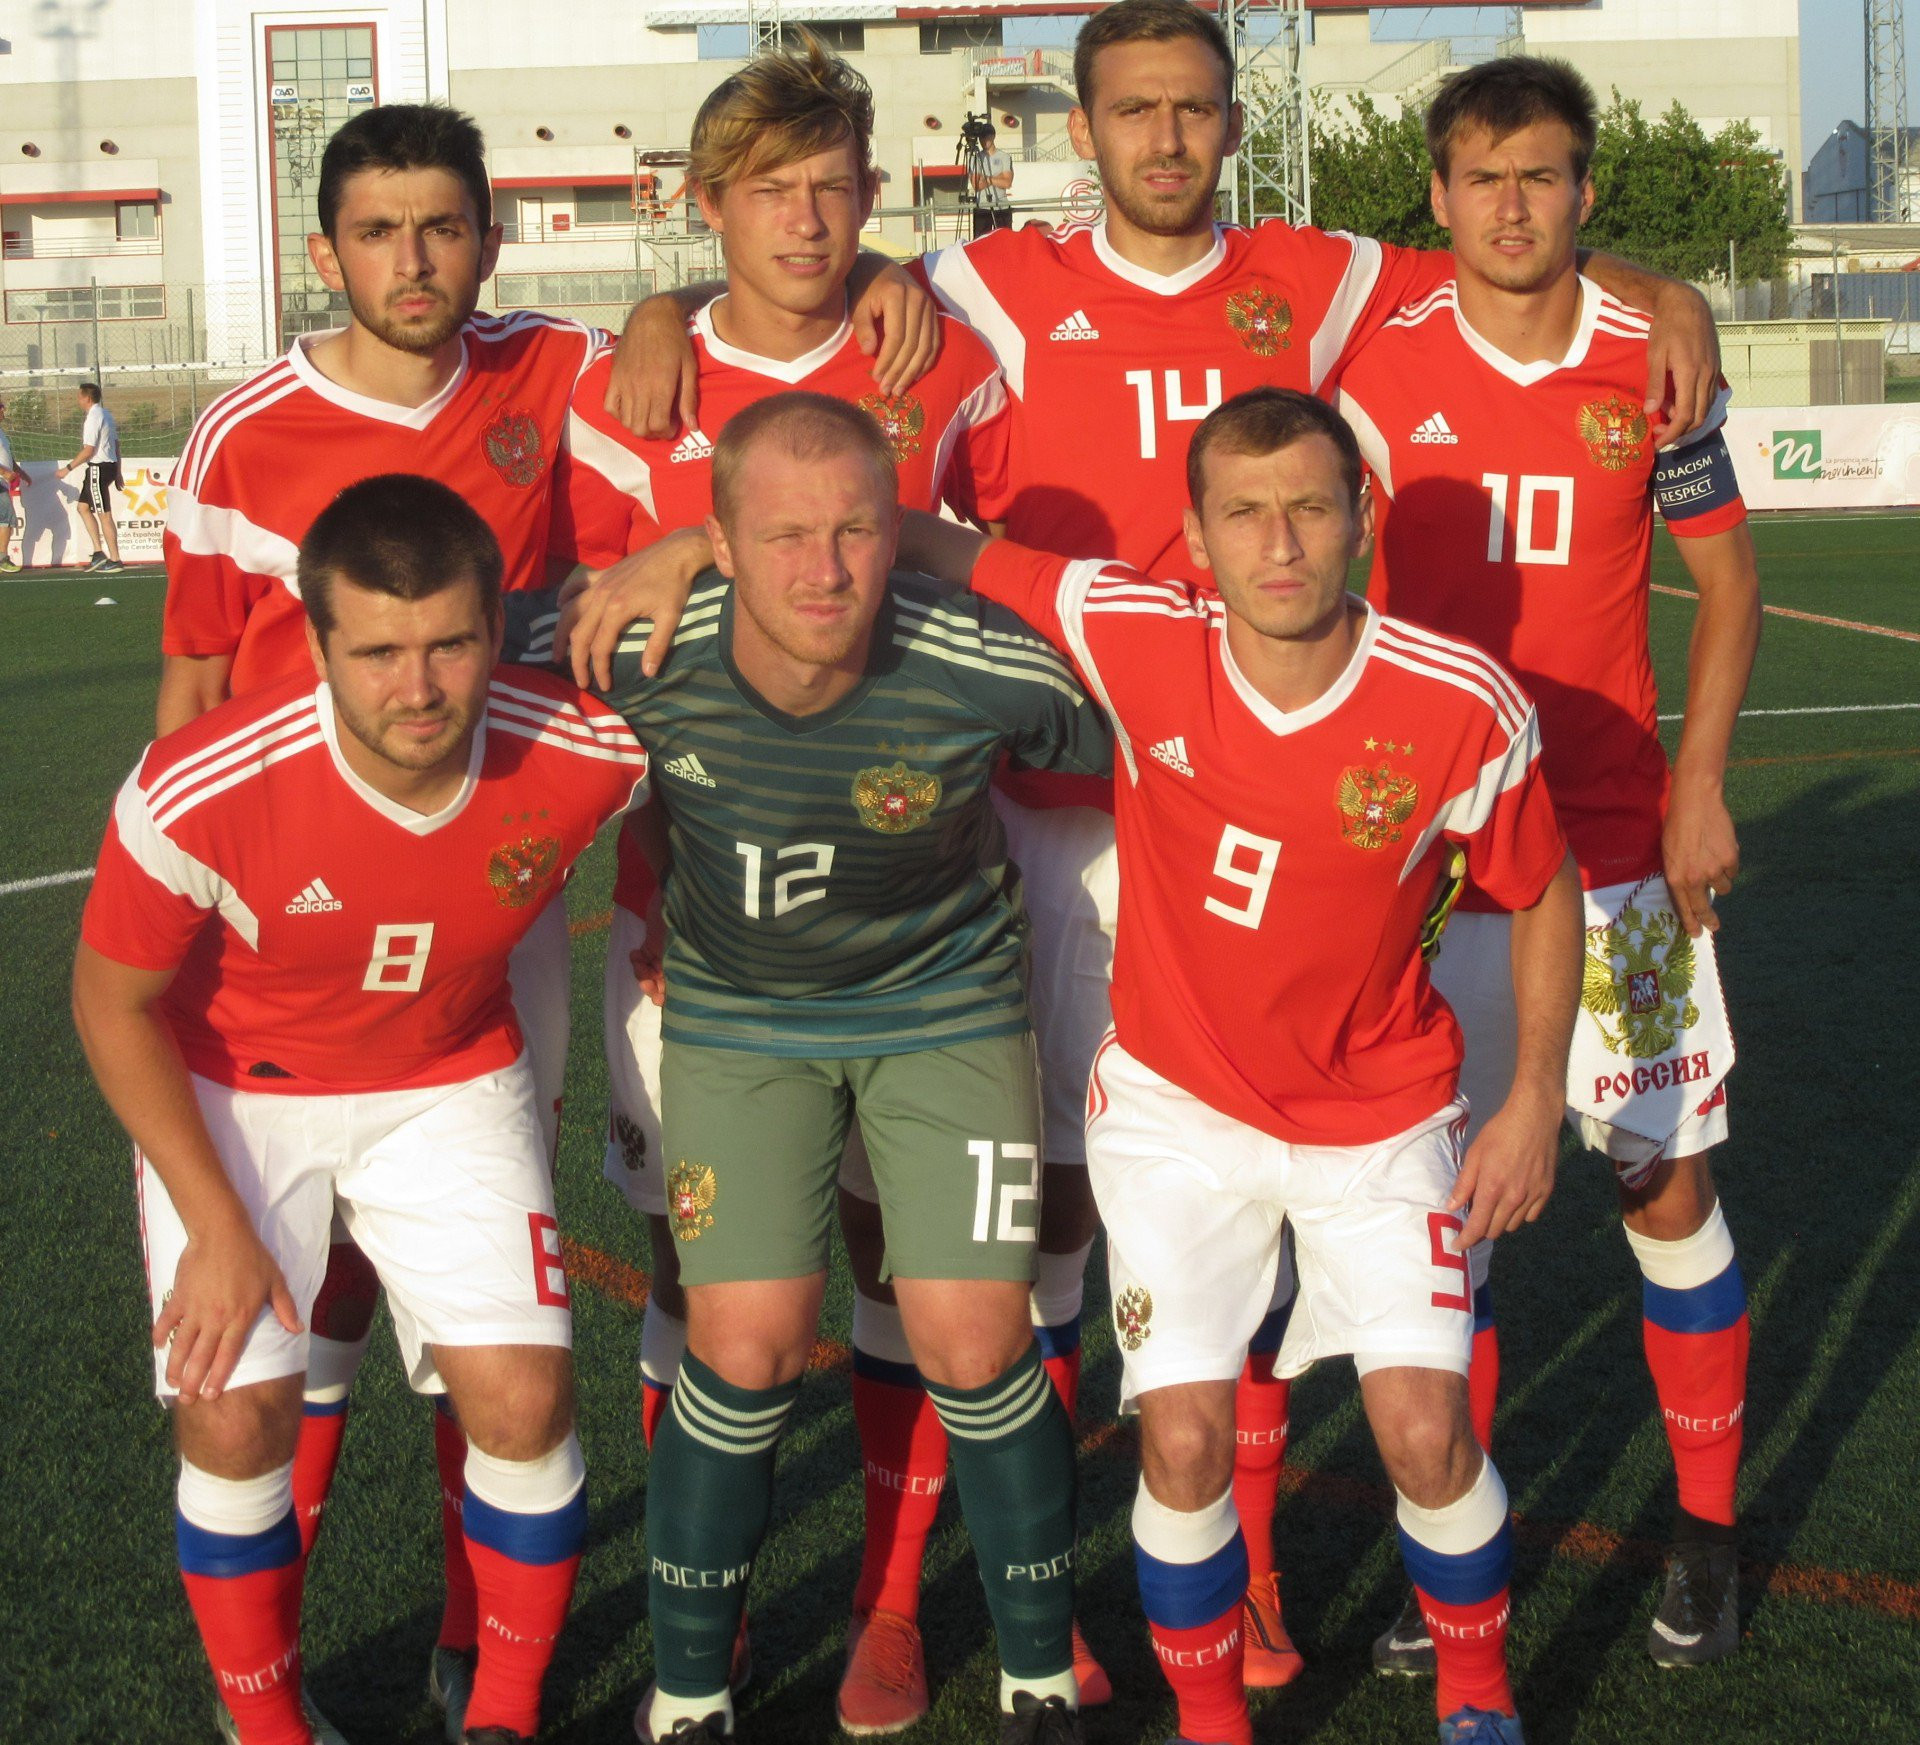 Russia sealed their place in the final with a win over England ©IFCPF/Twitter